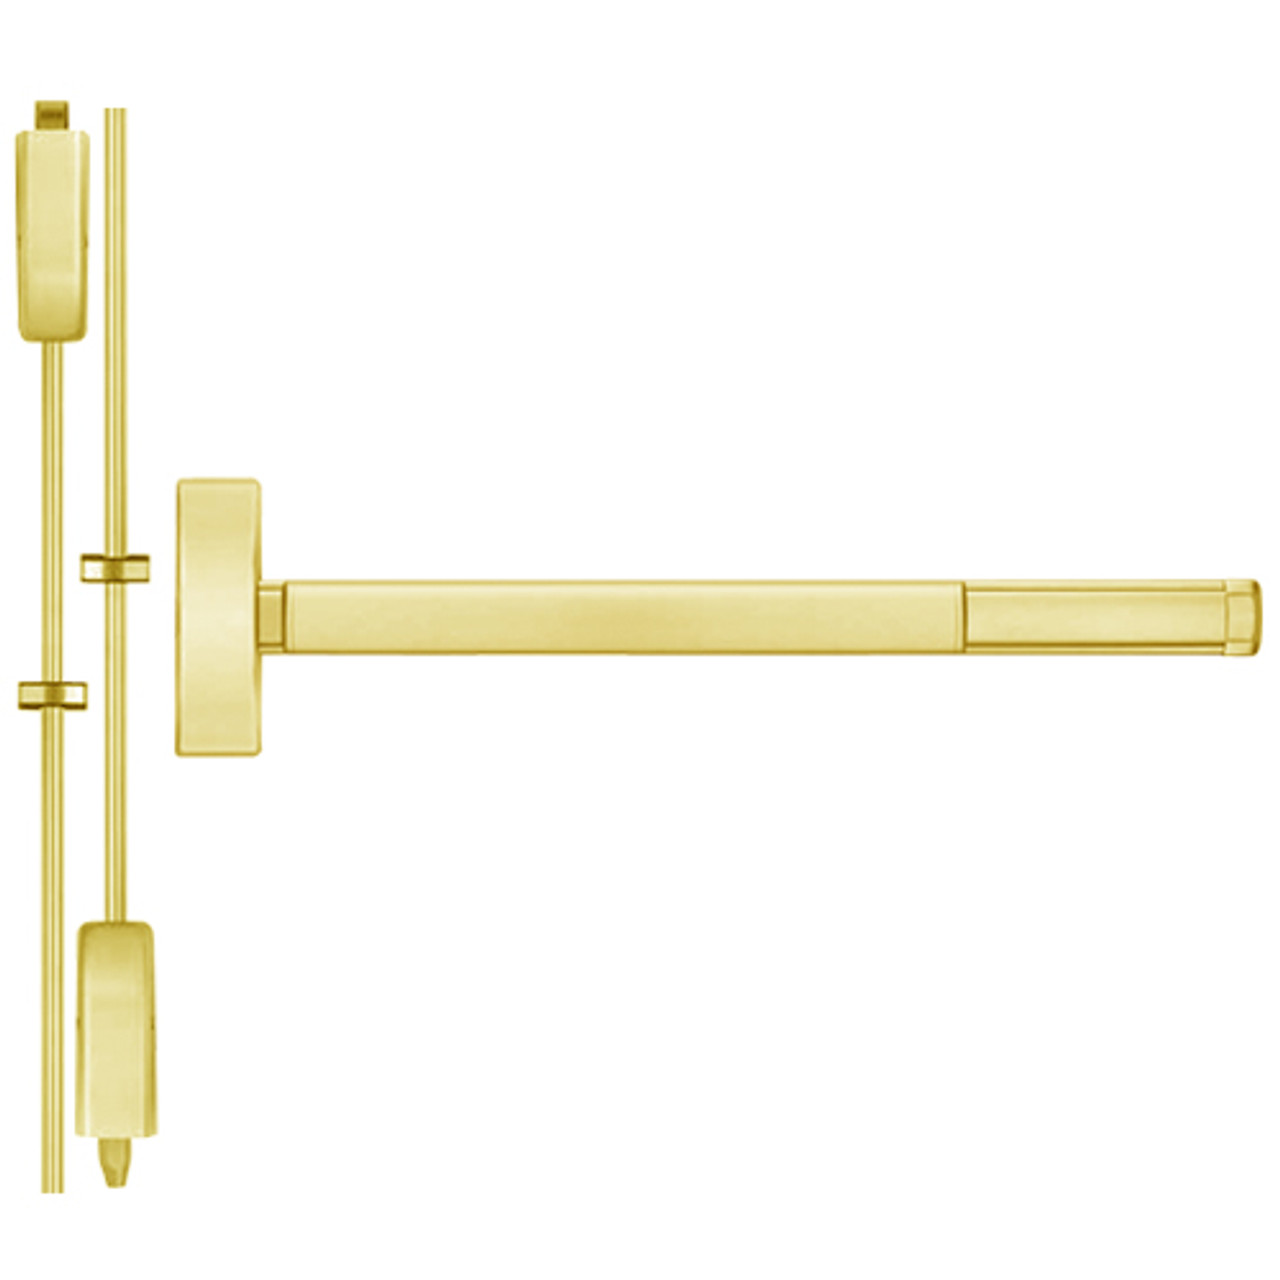 TSFL2201-605-48 PHI 2200 Series Apex Surface Vertical Rod Device with Touchbar Monitoring Switch Prepped for Cover Plate in Bright Brass Finish